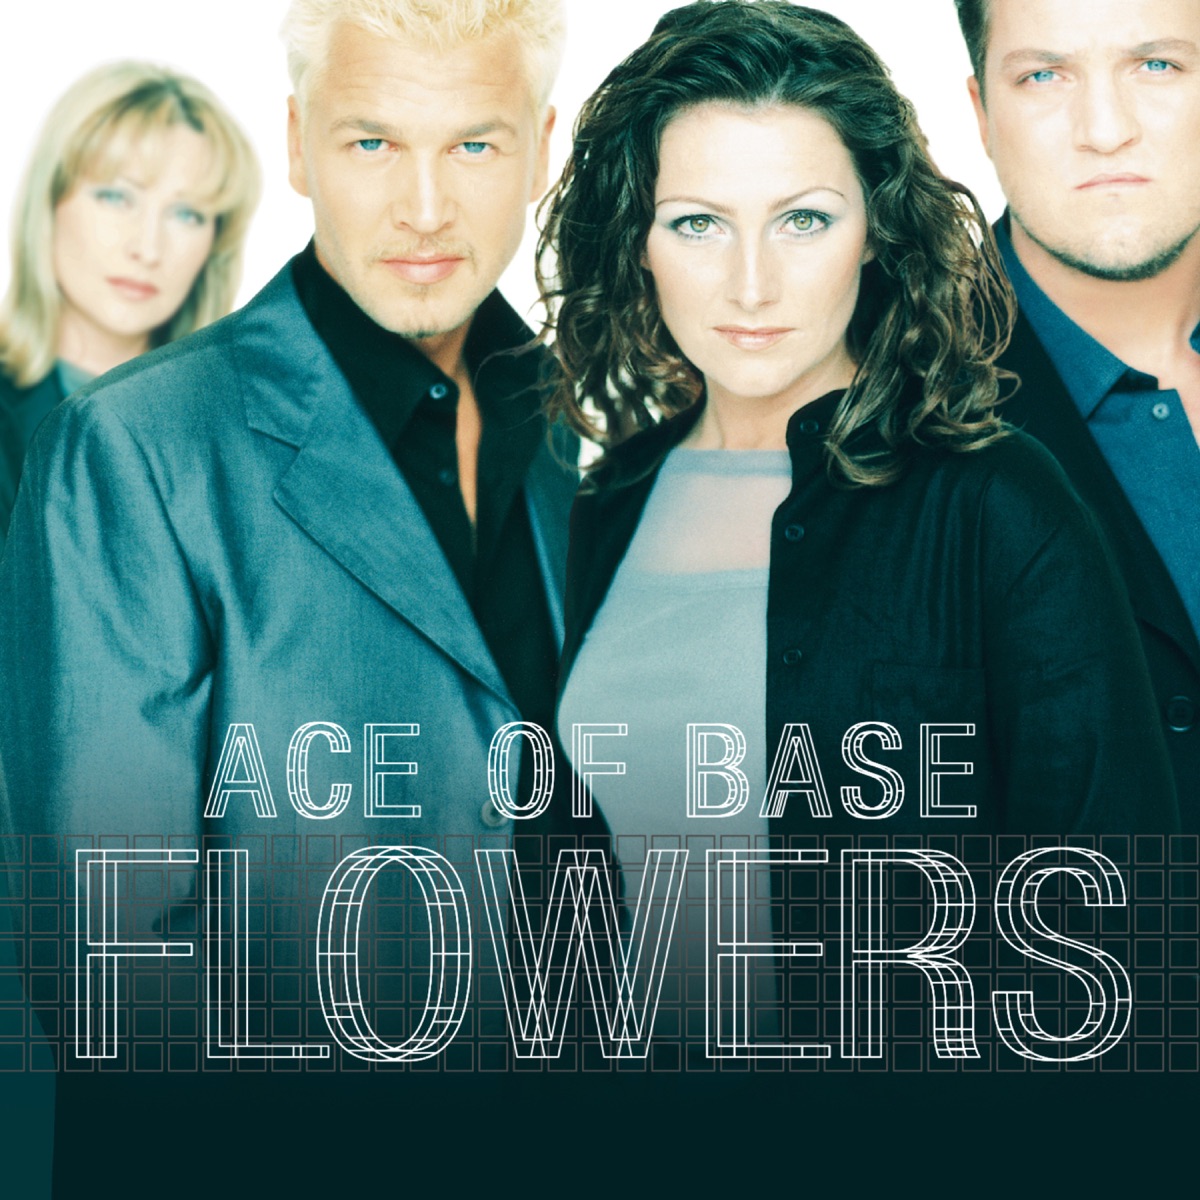 Da Capo (Remastered) by Ace of Base on Apple Music